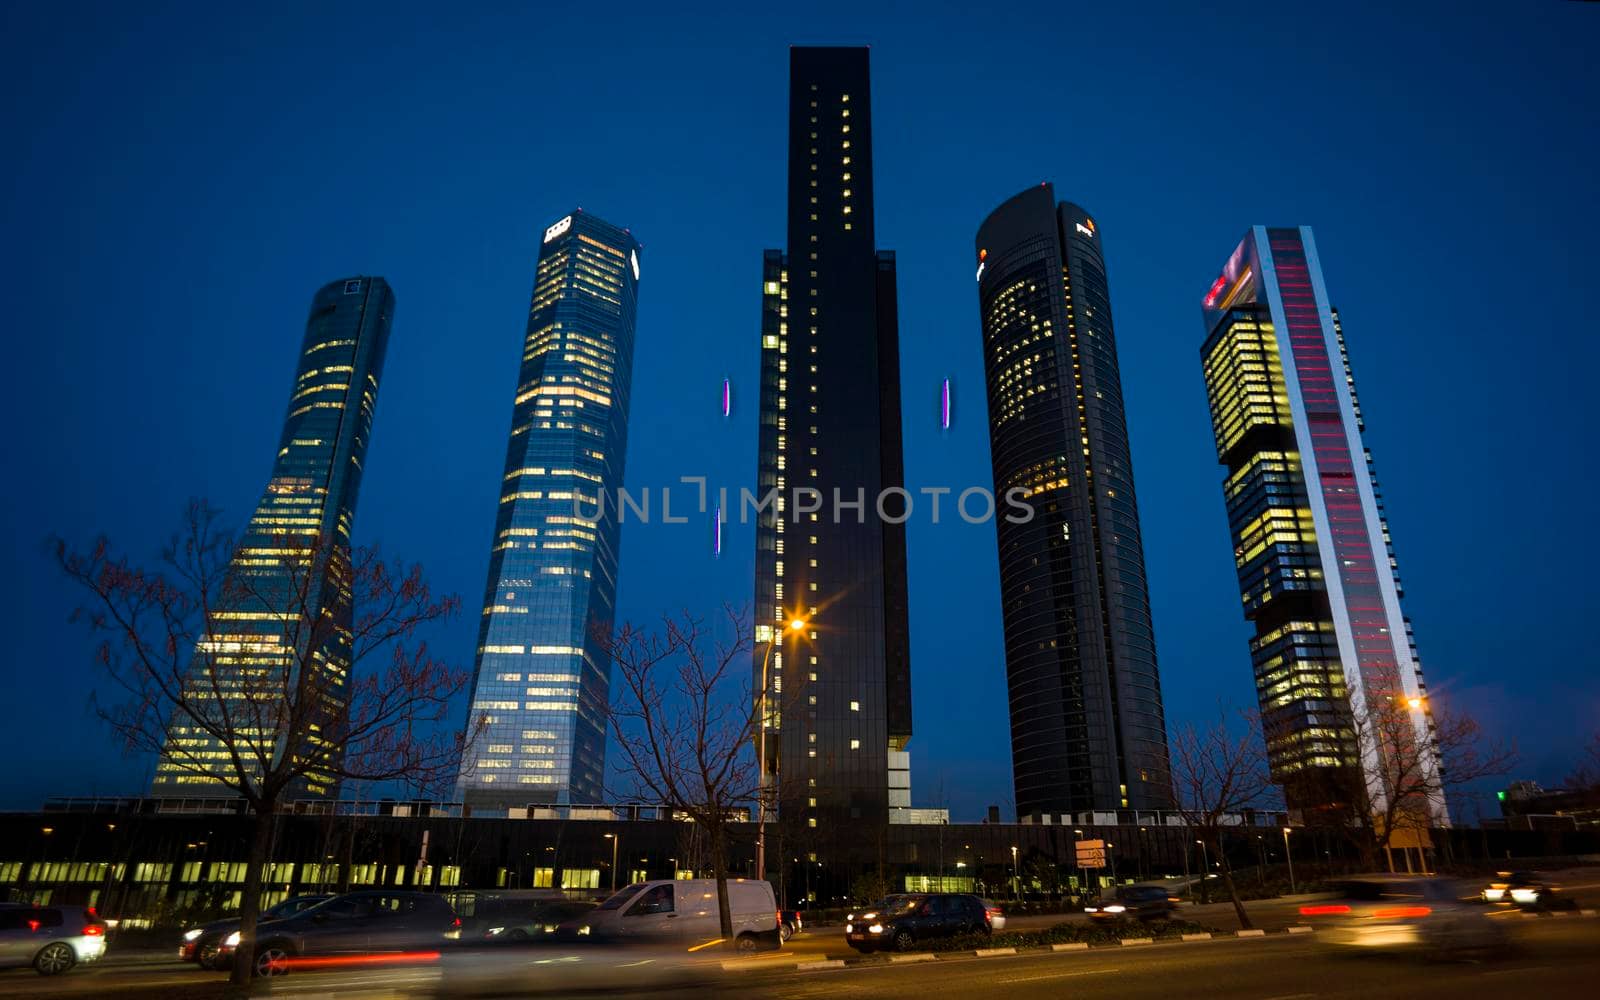 Night view of the Cuatro Torres Business Area, Madrid's main financial area. The glass tower is the tallest in Spain, at 249 meters.